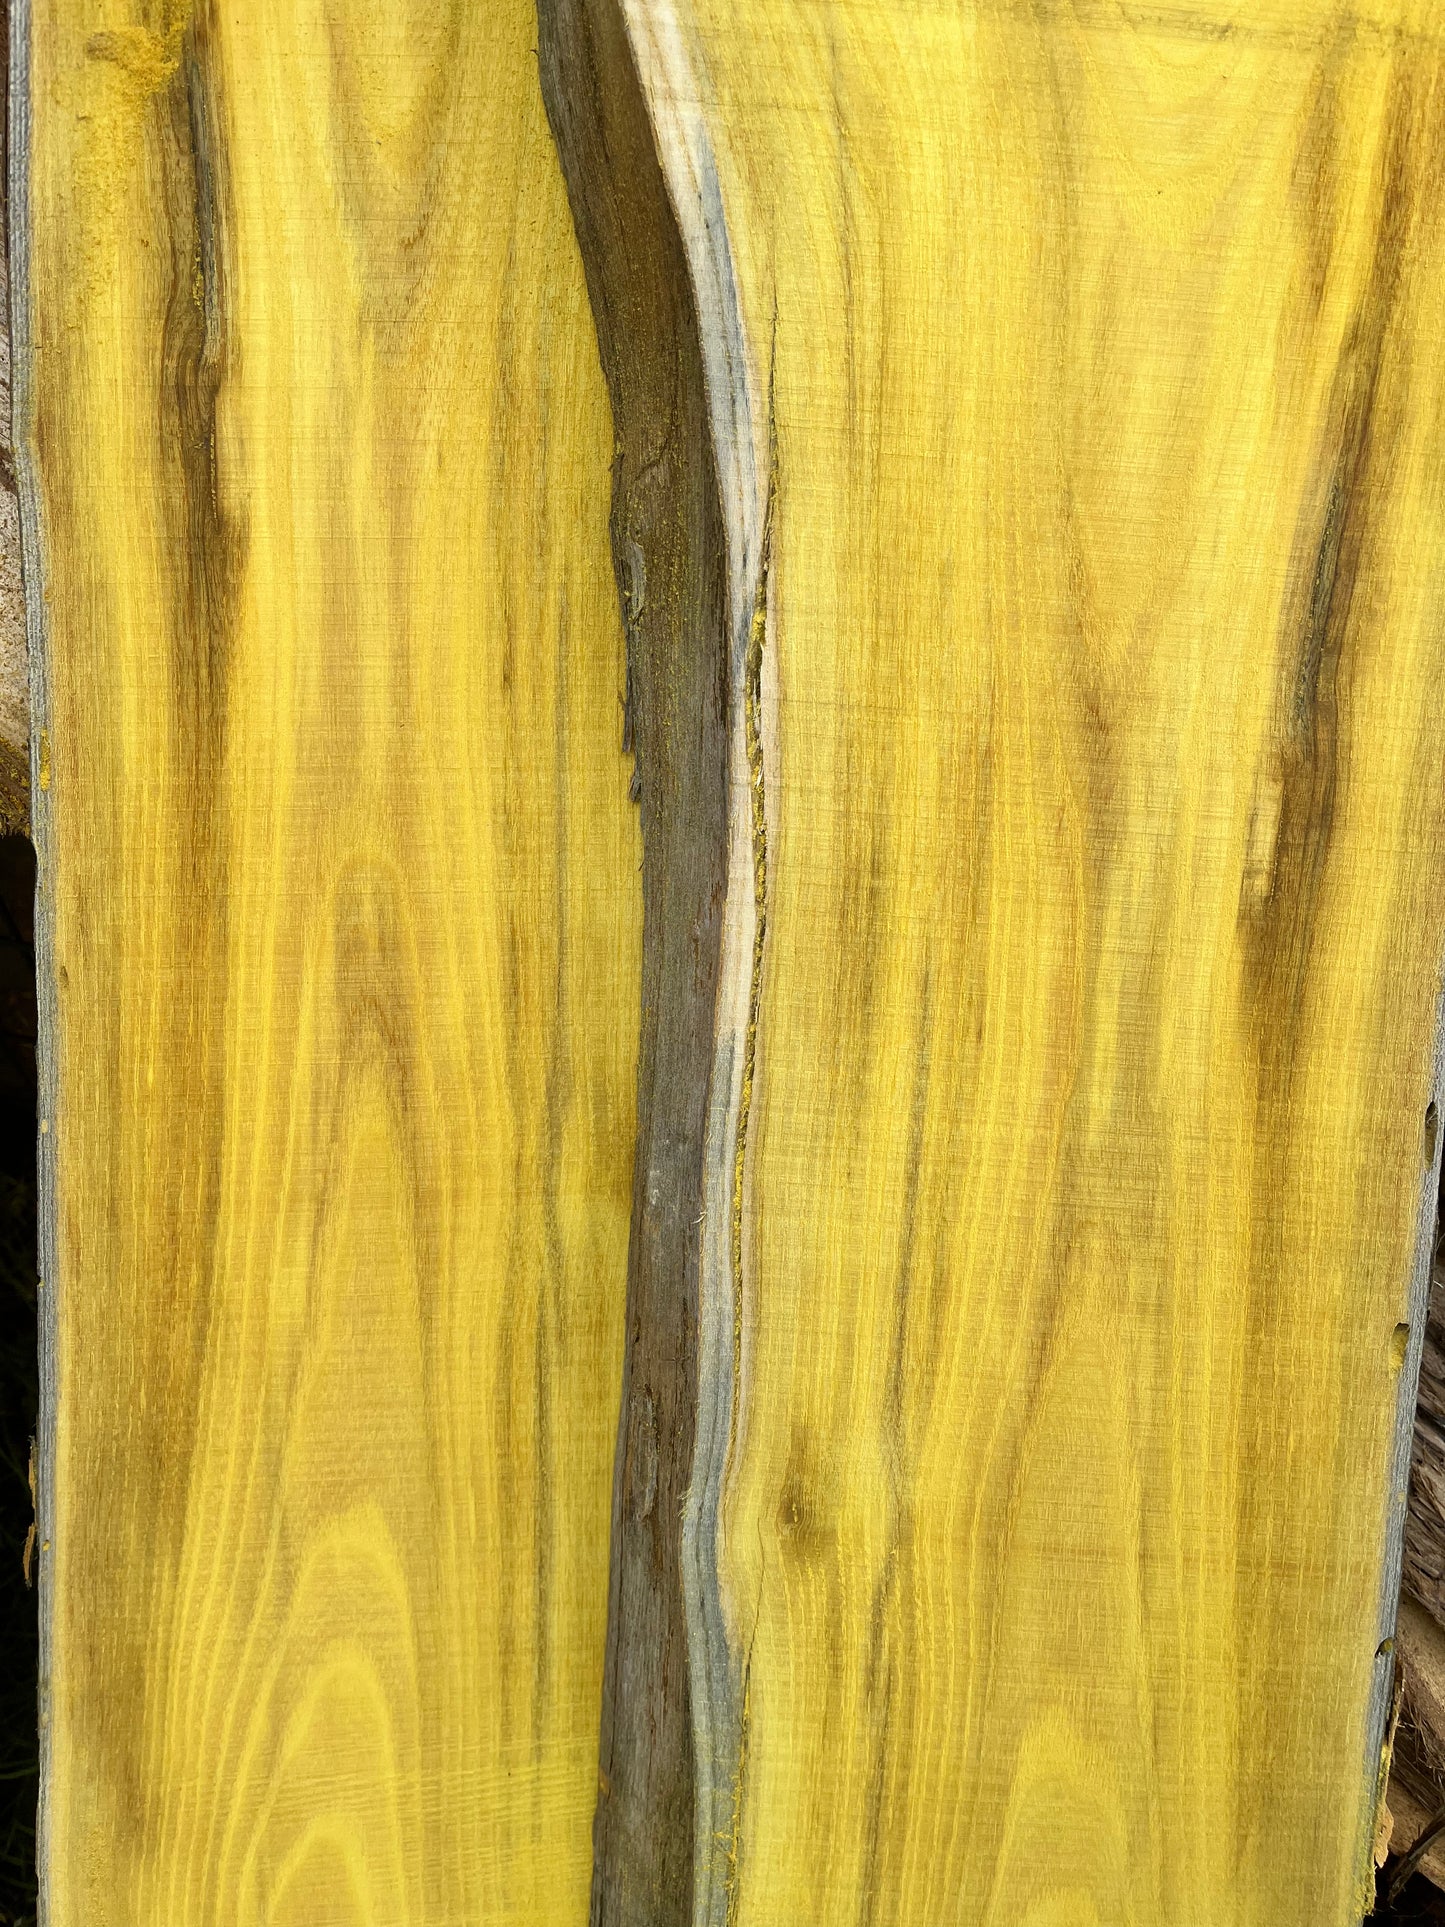 1" Thick Rough Cut Osage Orange (Bois d'Arc) Live Edge Slabs for Charcuterie Boards, Furniture, Tables and Bar Tops, Shelves, and More - Kiln Dried